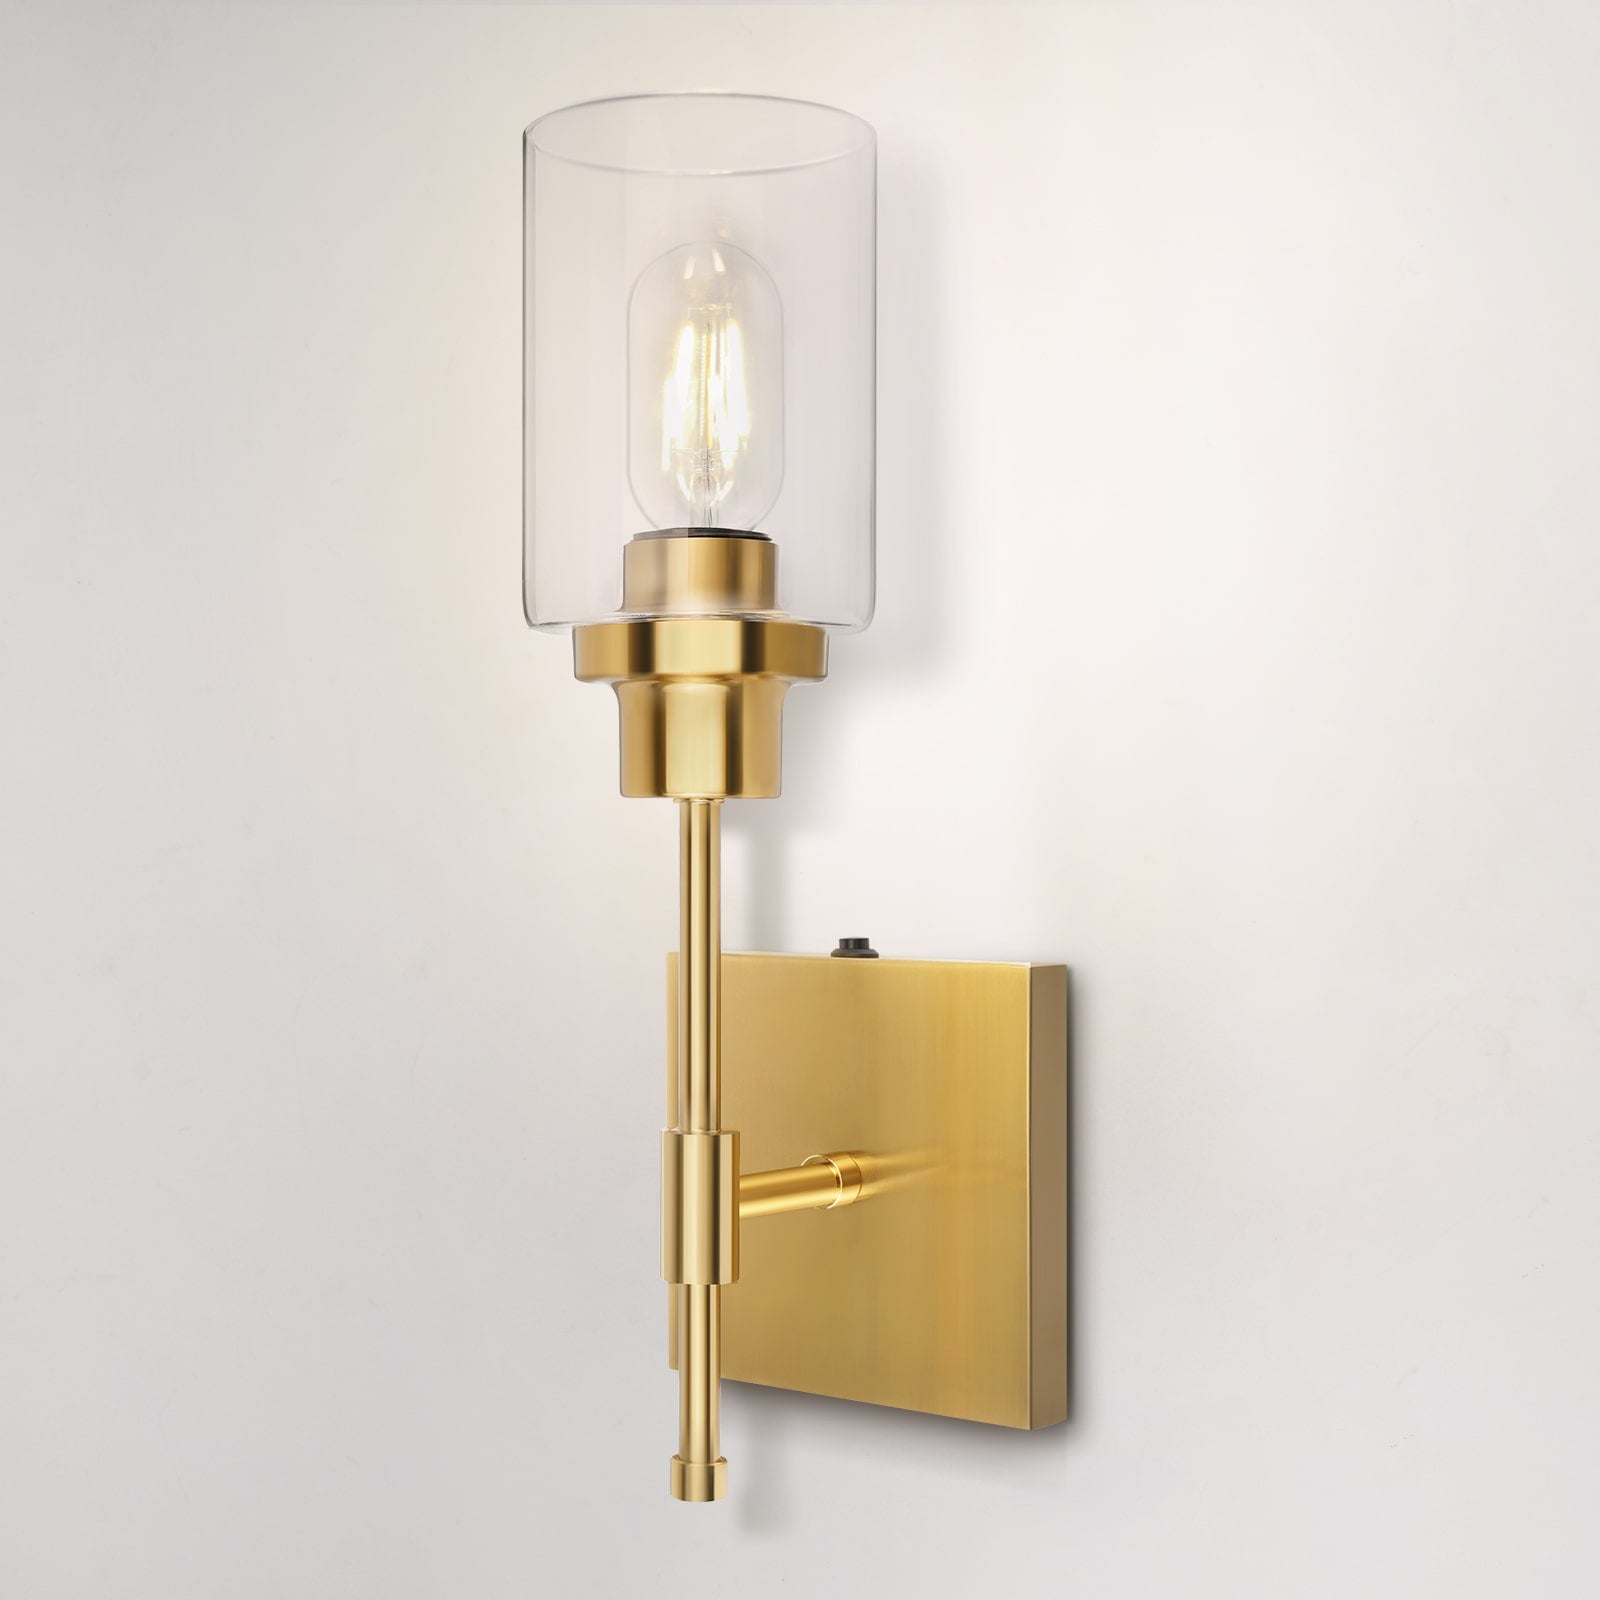 C01 Battery Operated Wall Sconce Modern Light Fixture for Hallway